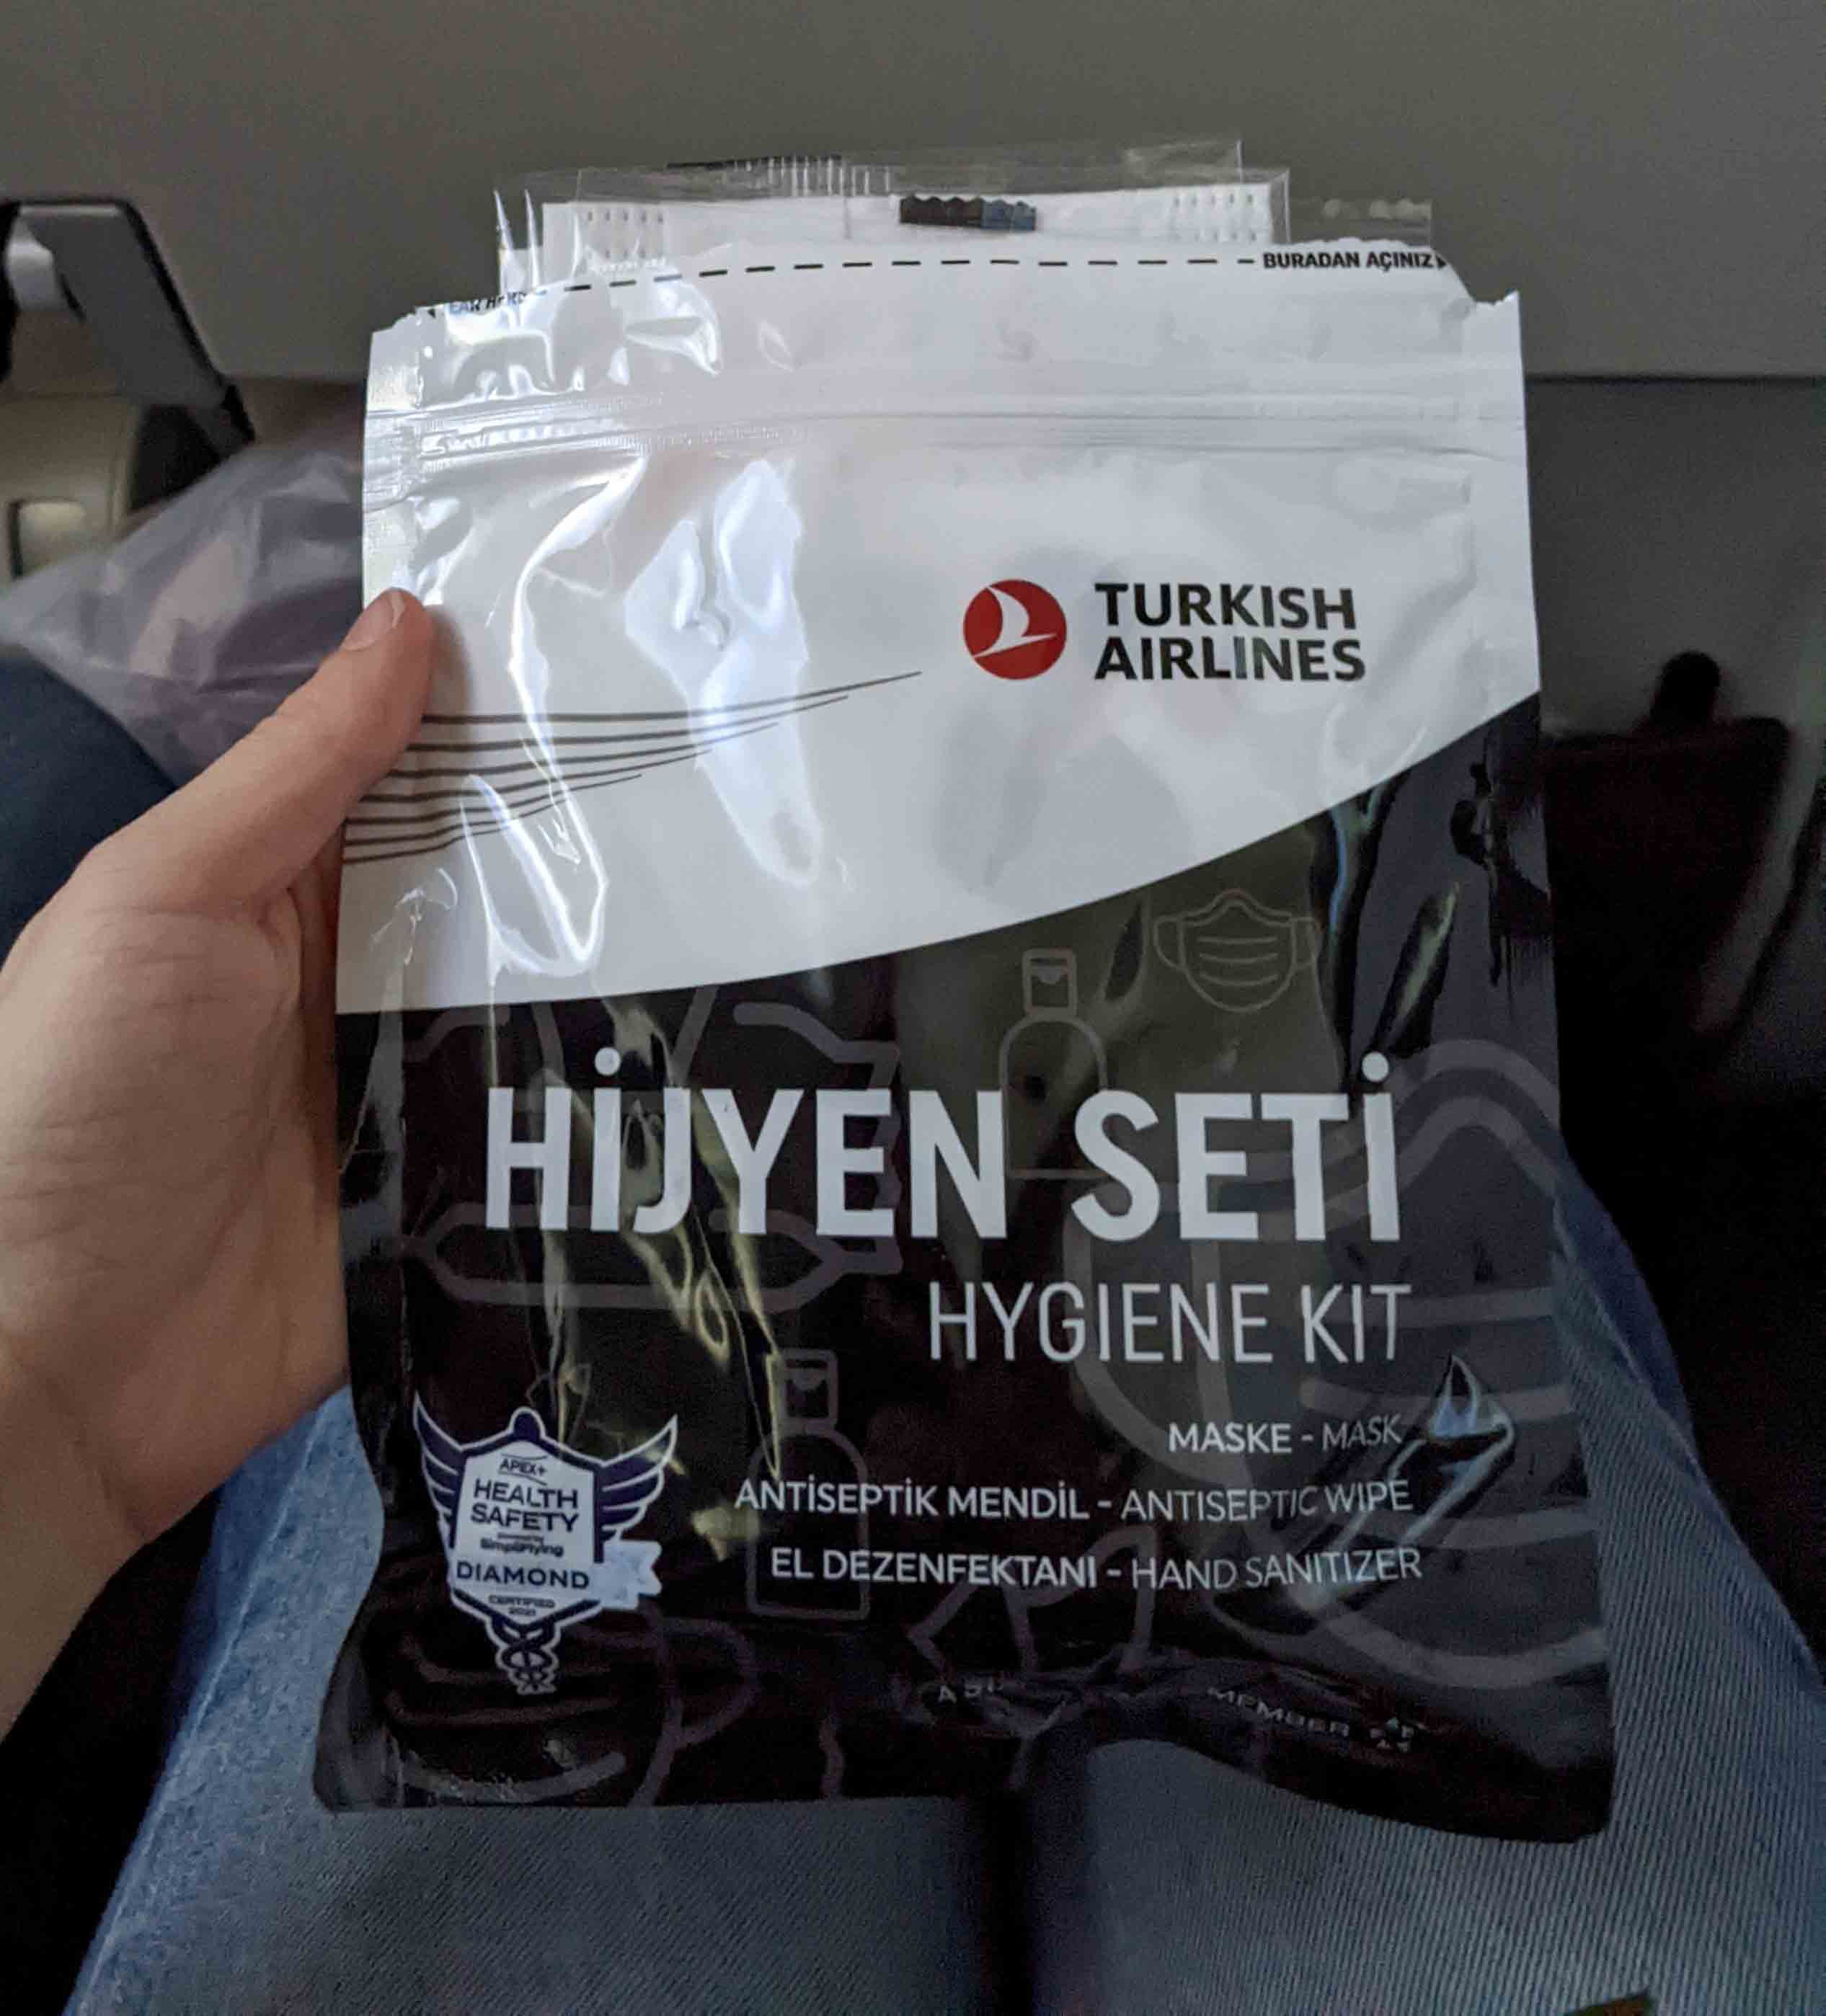 Hygiene kit provided on an international flight with Turkish Airlines, including face masks, antiseptic wipes and hand sanitizer